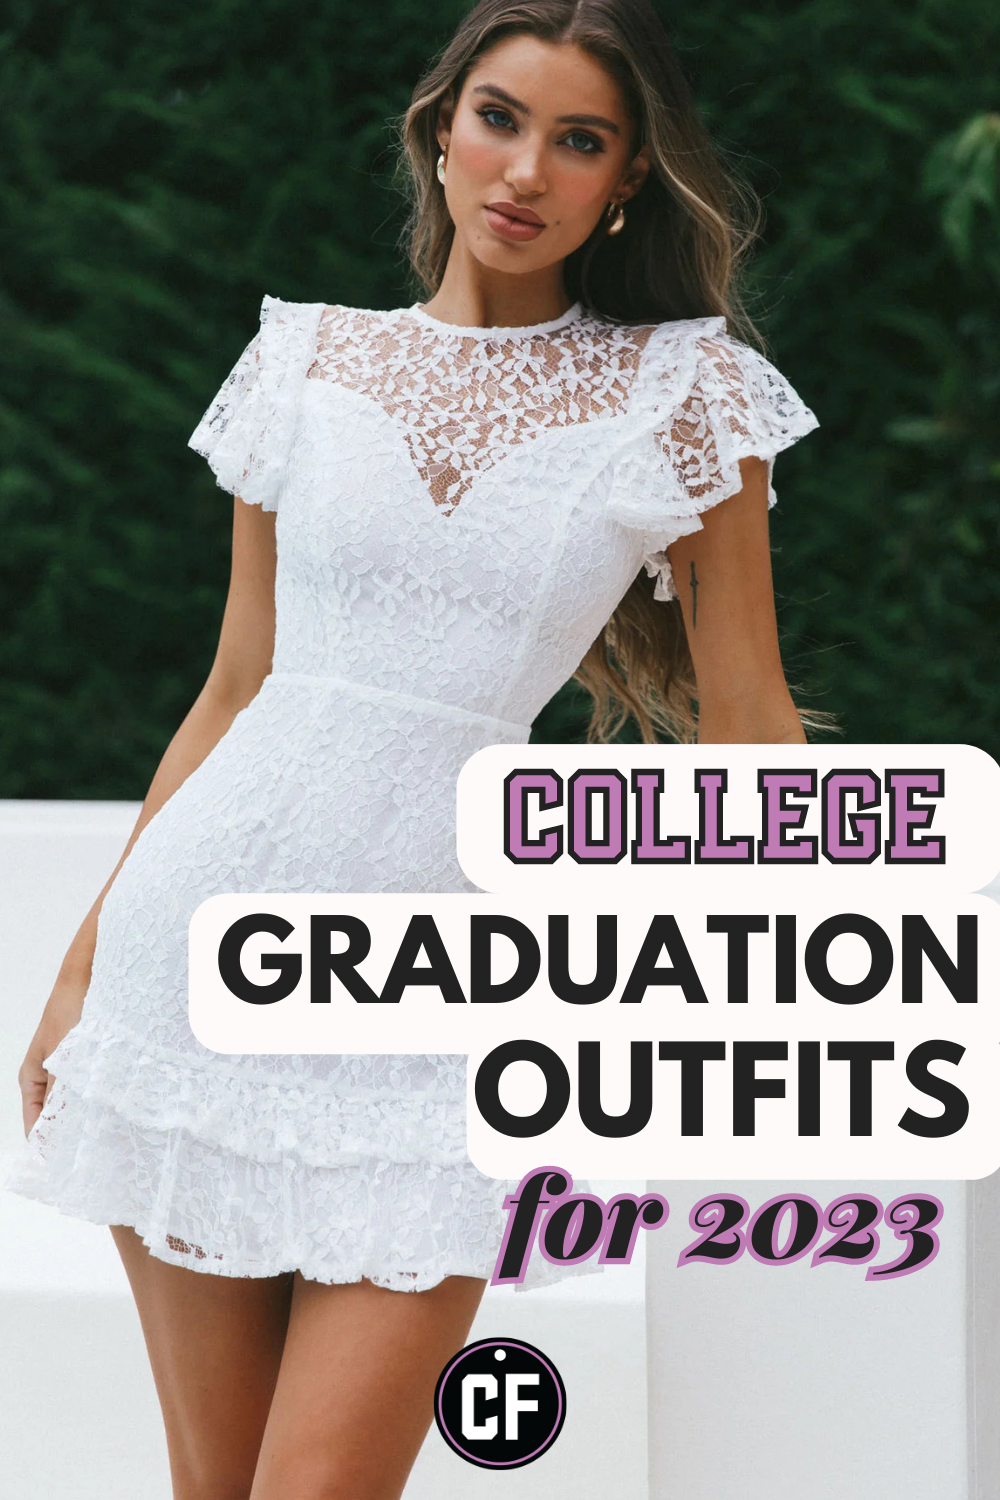 Graduate in Style with These College Graduation Outfits